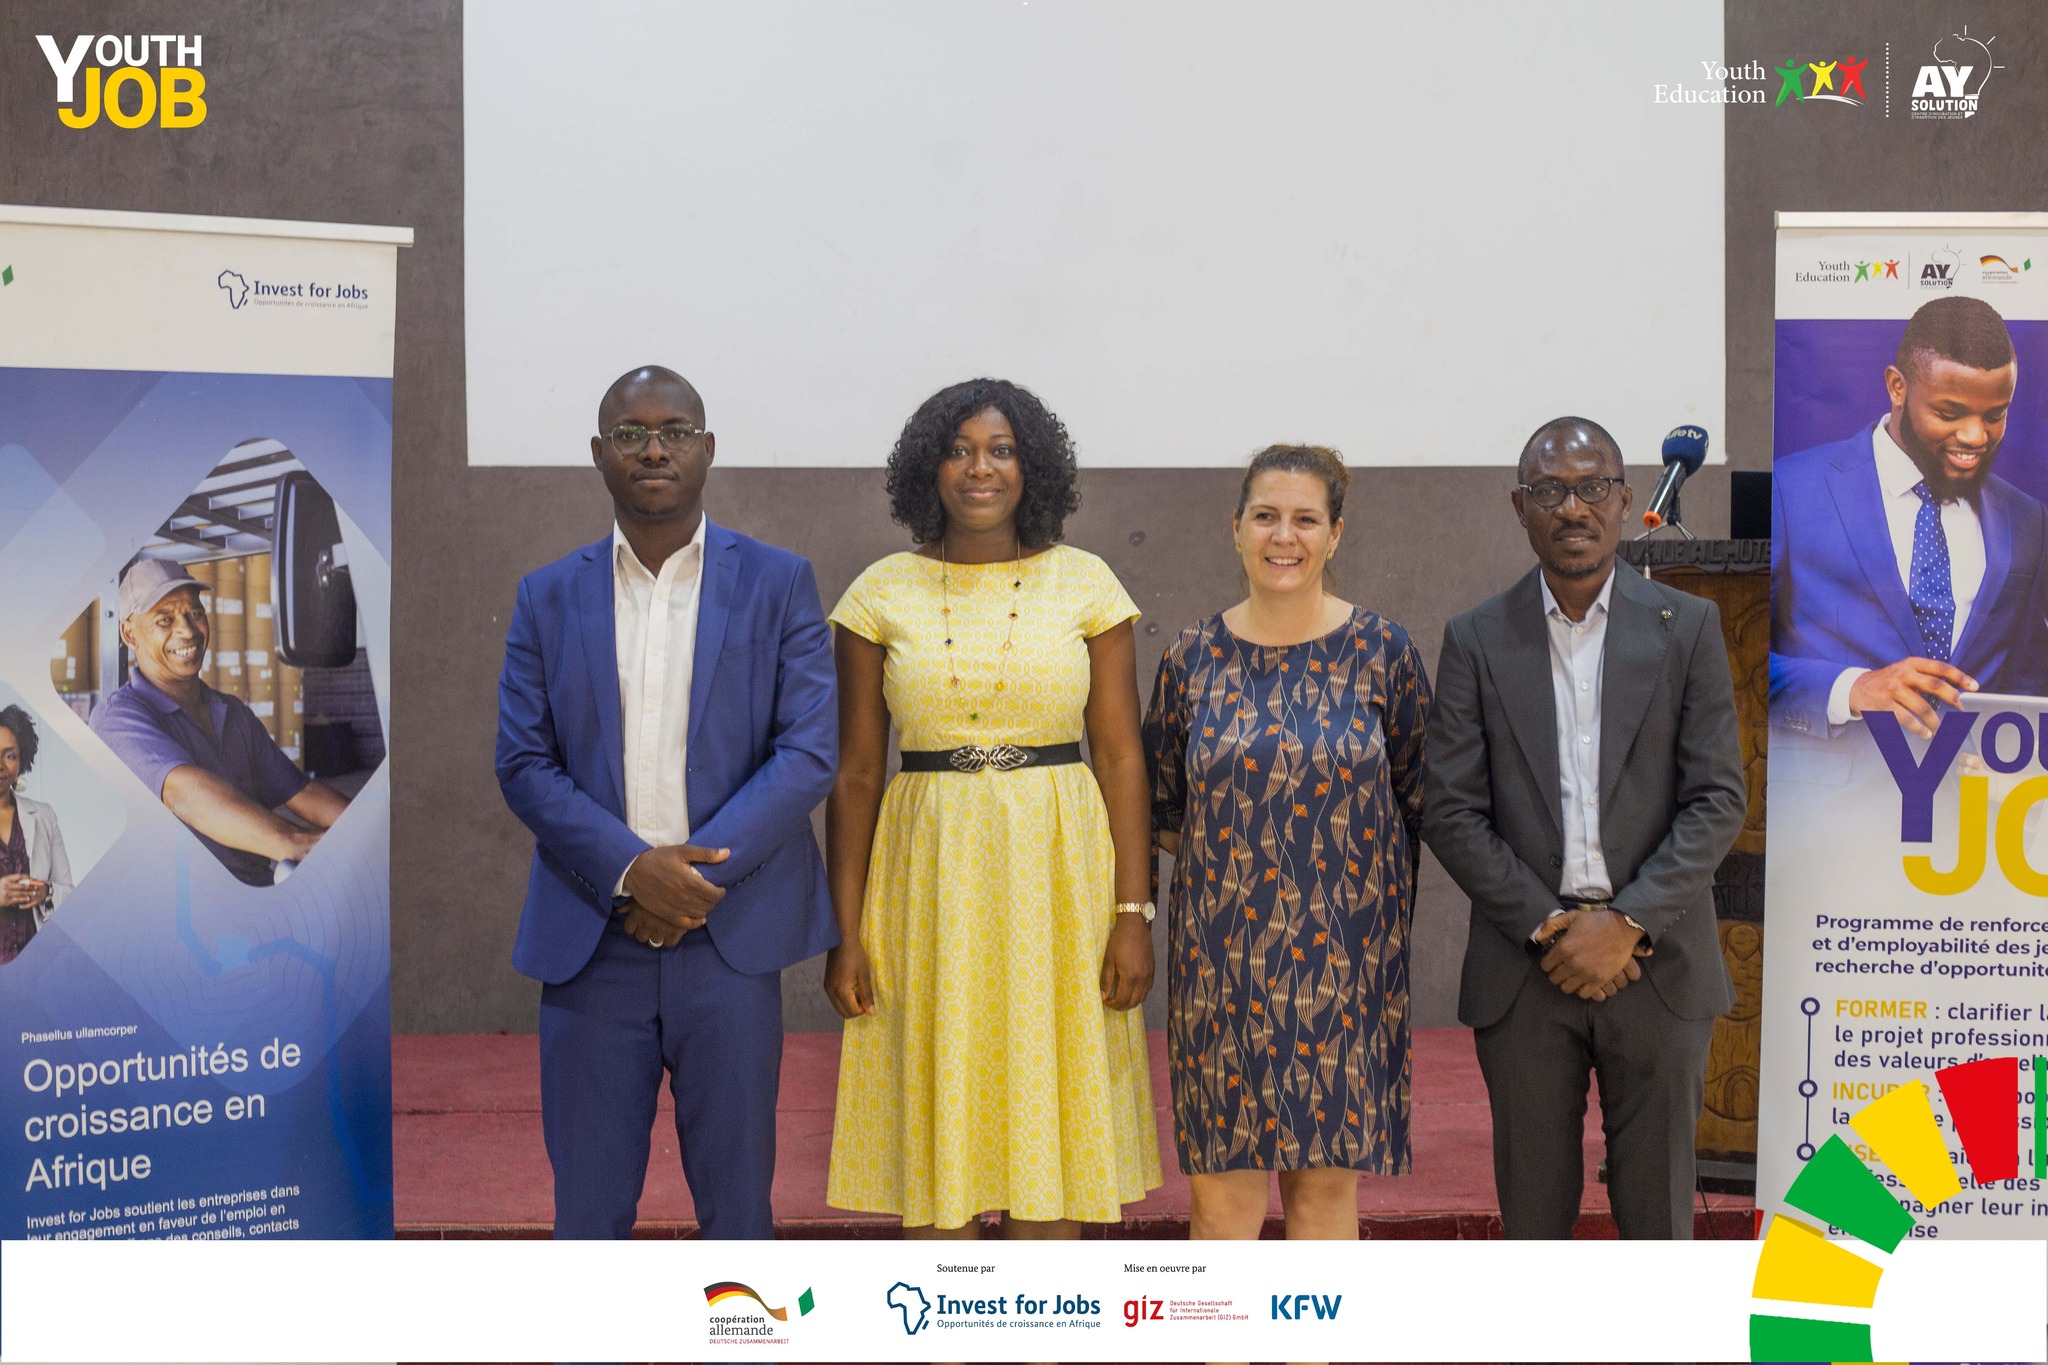 Youth Education et Invest For Job lancent le programme YOUTH JOB